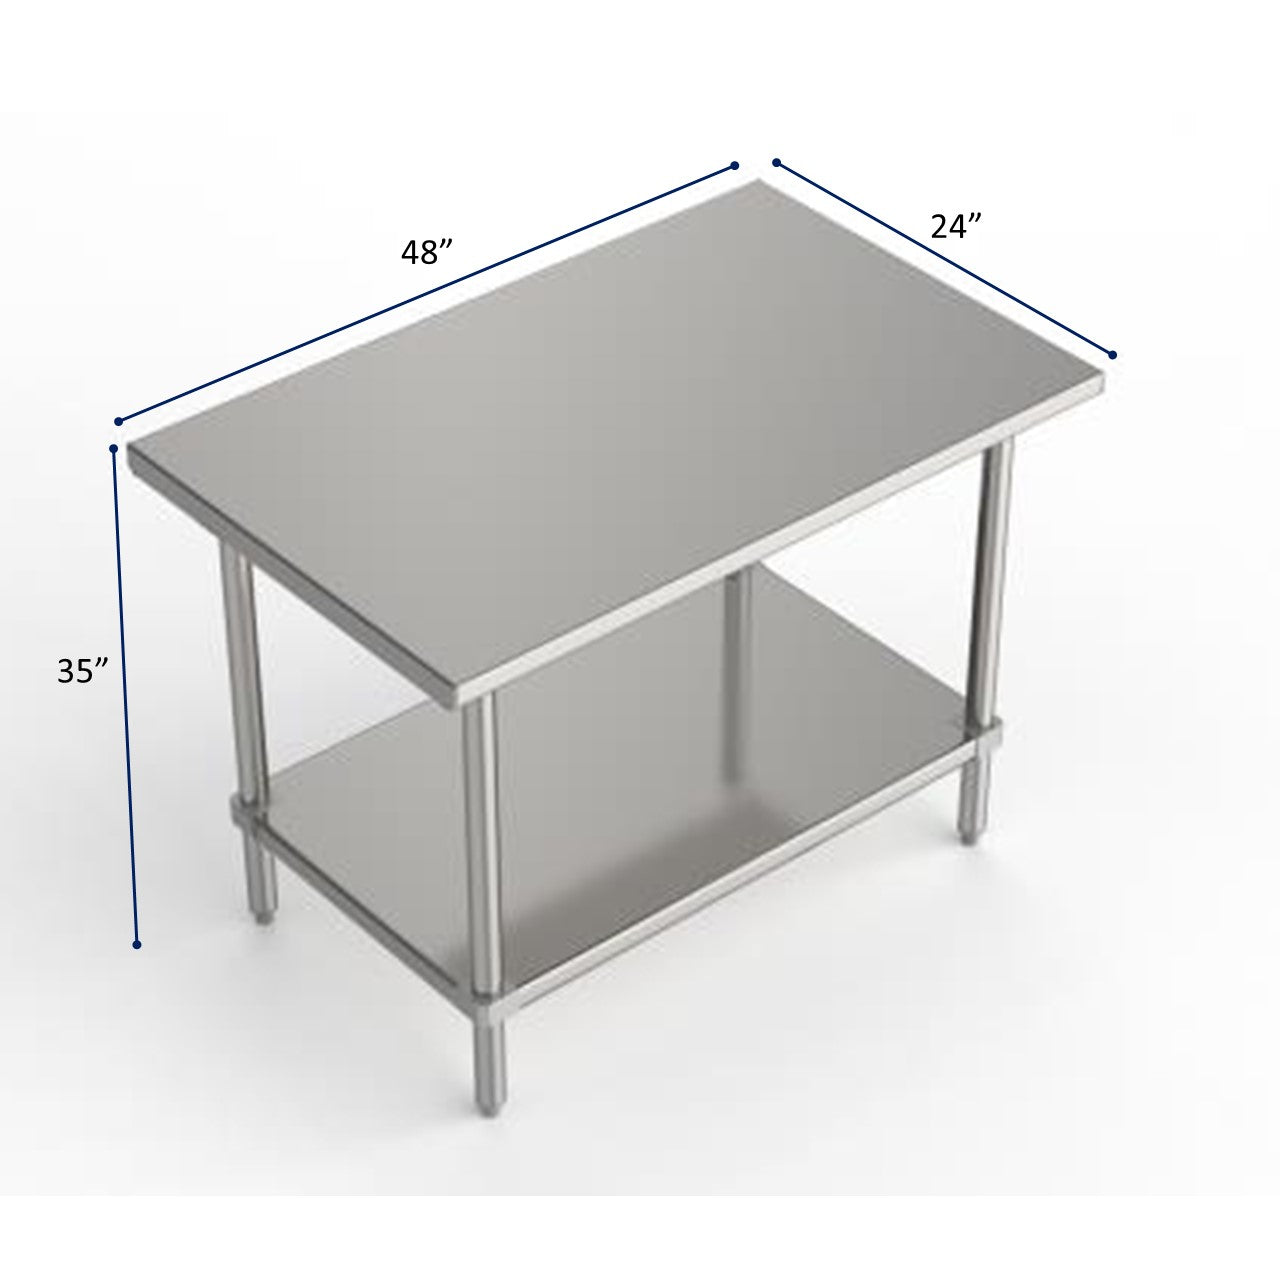 GSW Commercial Grade Flat Top Work Table with All Stainless Steel Top, Undershelf & Legs, Adjustable Bullet Feet, NSF/ETL Approved to Meet Sanitation Food Service Standard 37 (24"D x 48"L x 35"H)